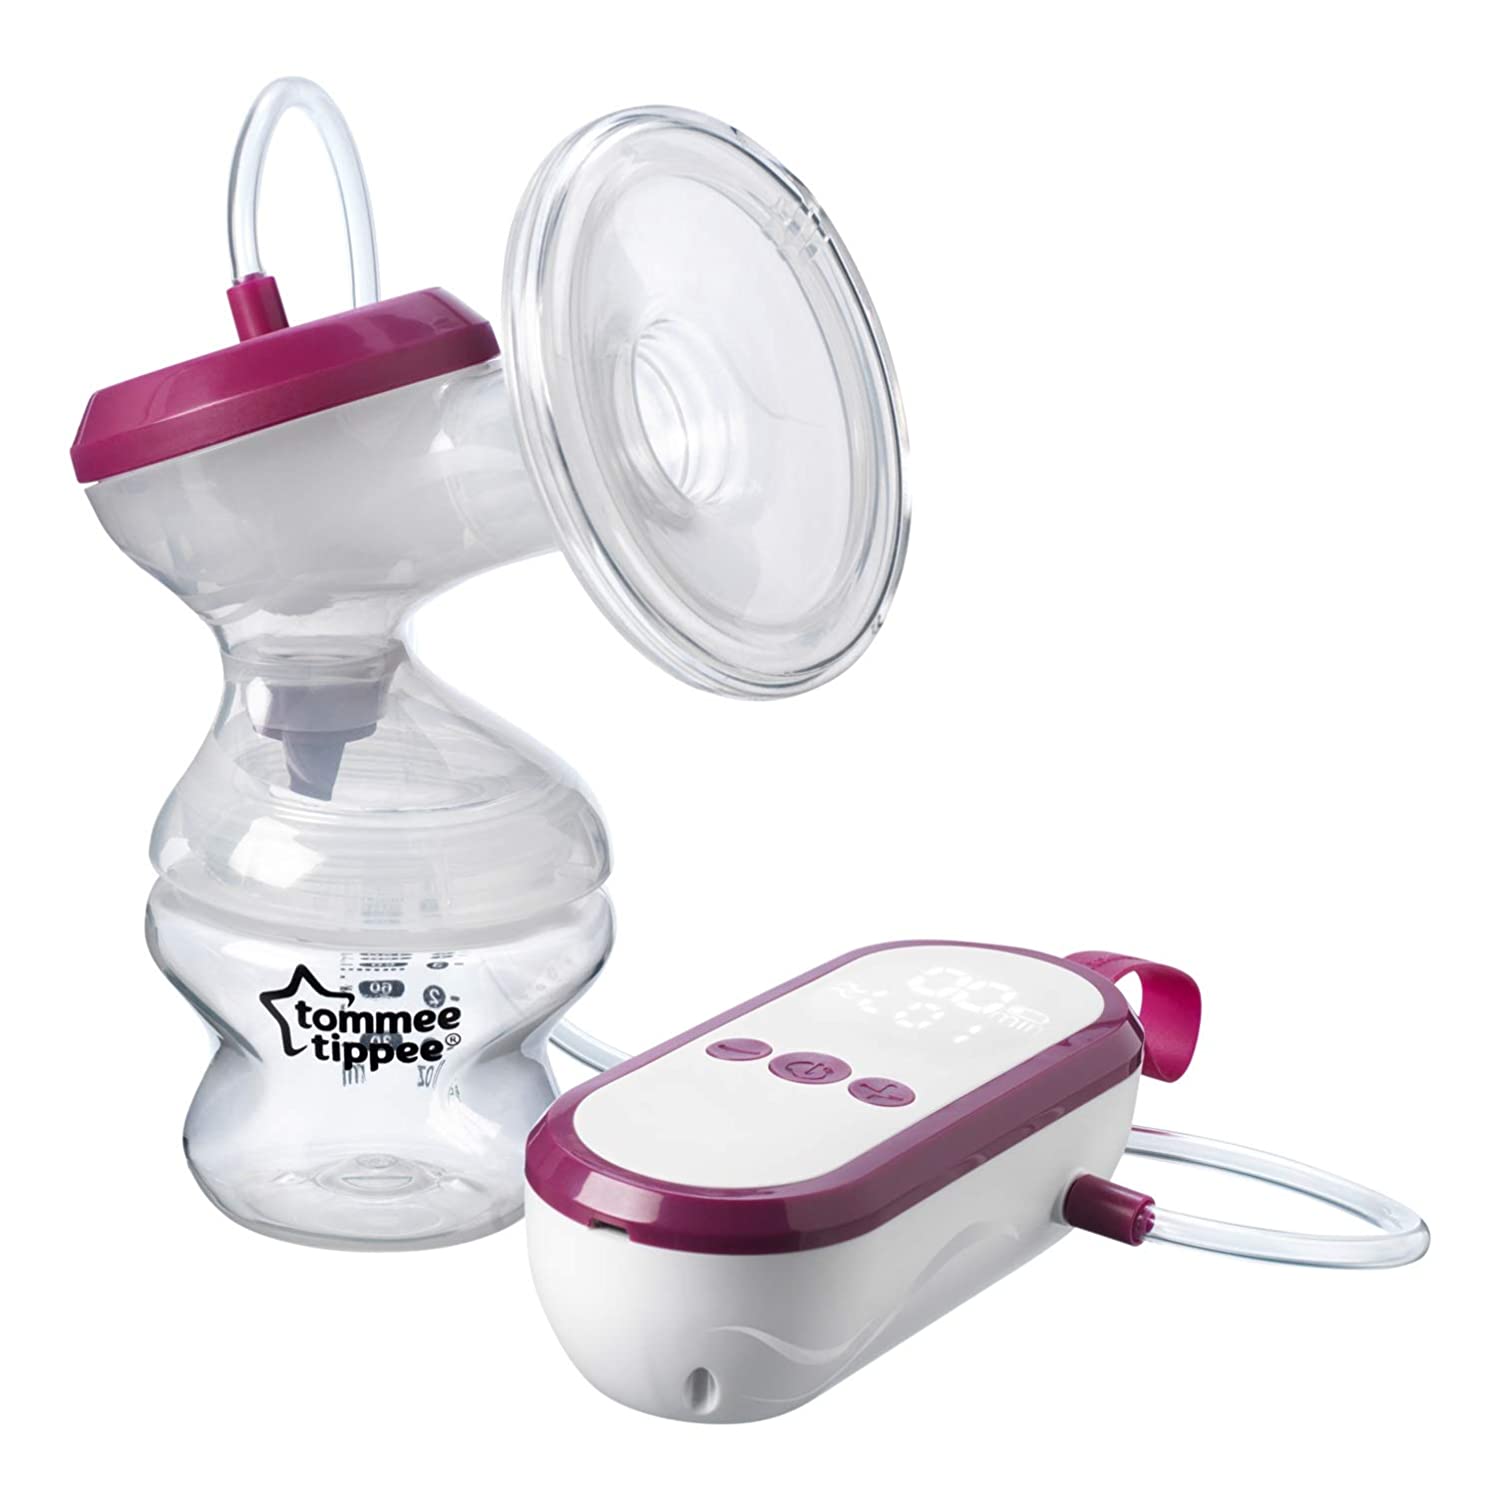 Tommee Tippee Electric Breast Pump Instructions Manual